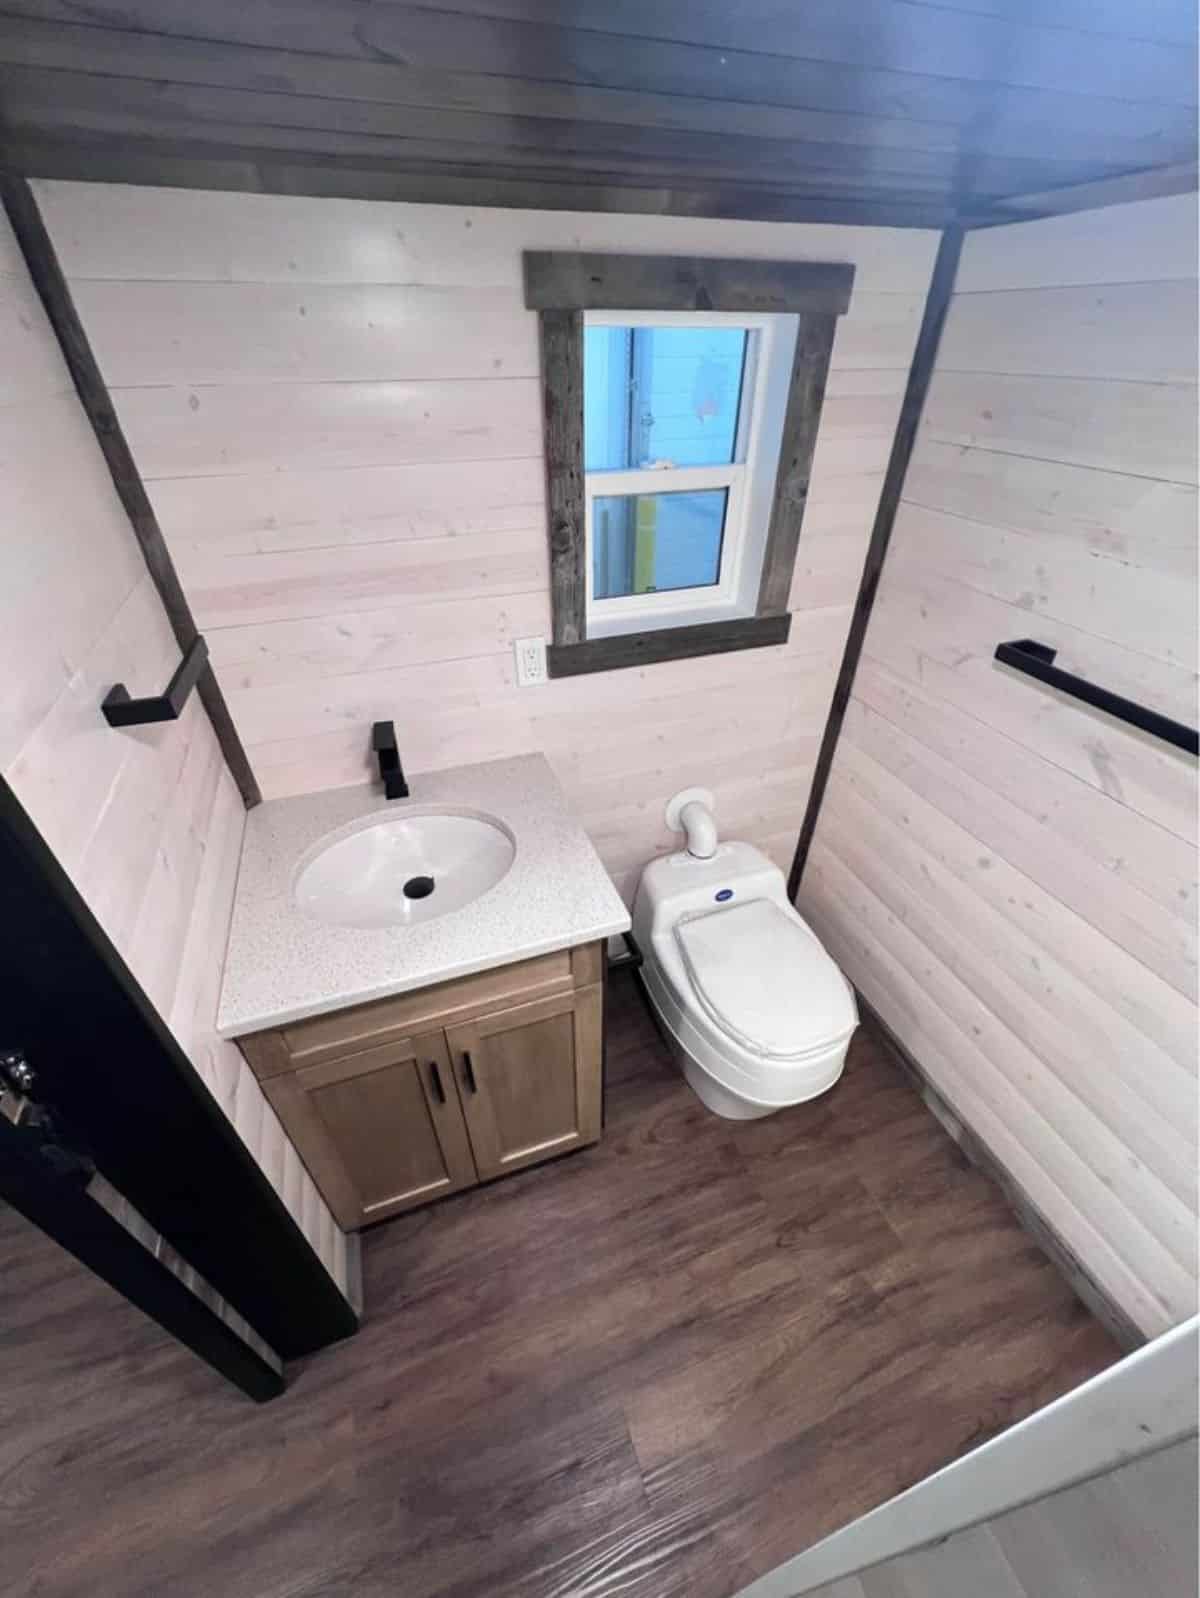 bathroom of NOAH certified tiny house has all the standard fittings